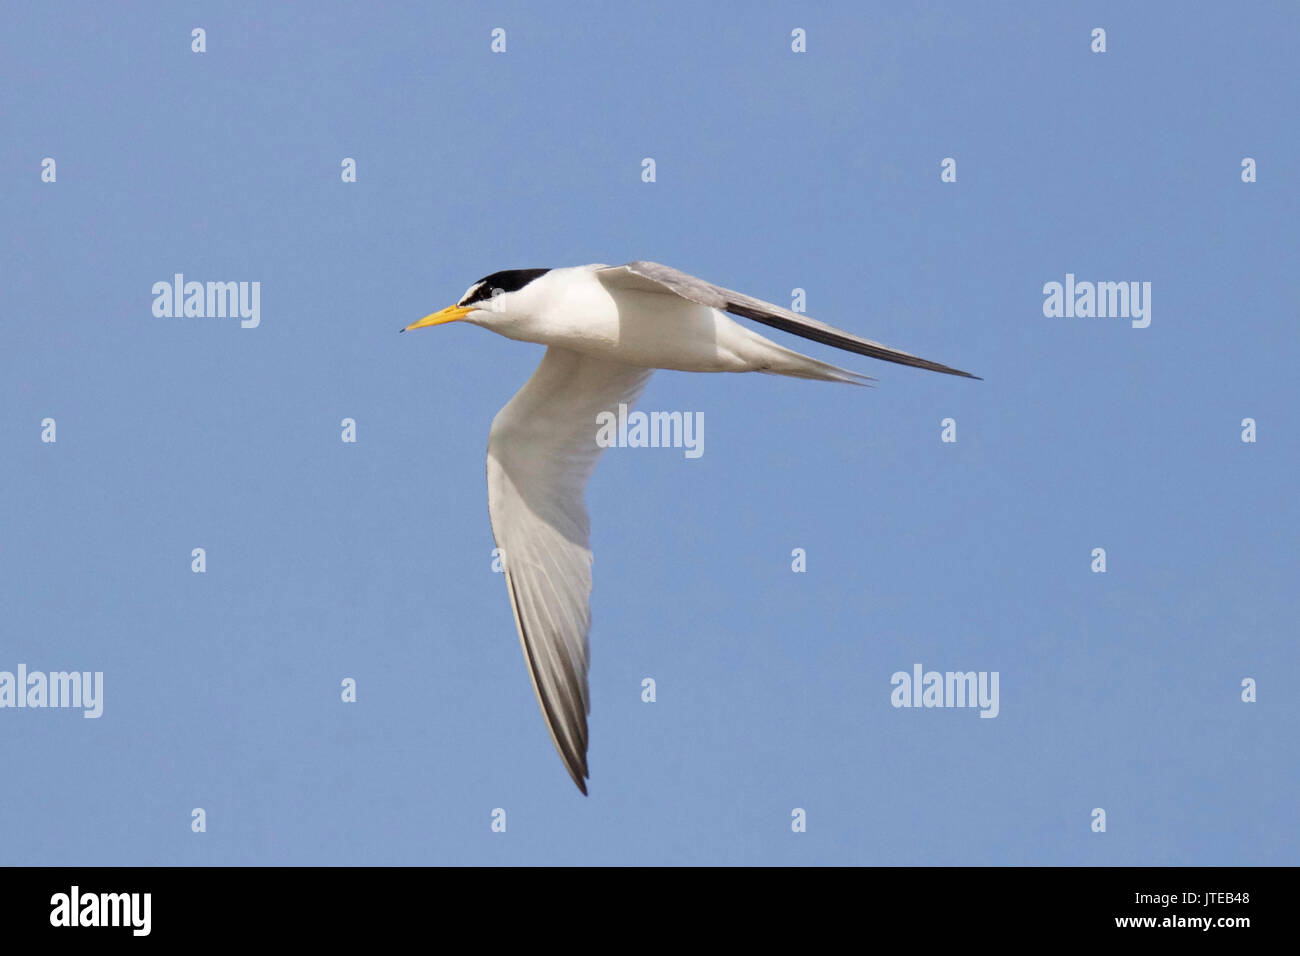 A least tern flying in a blue sky Stock Photo